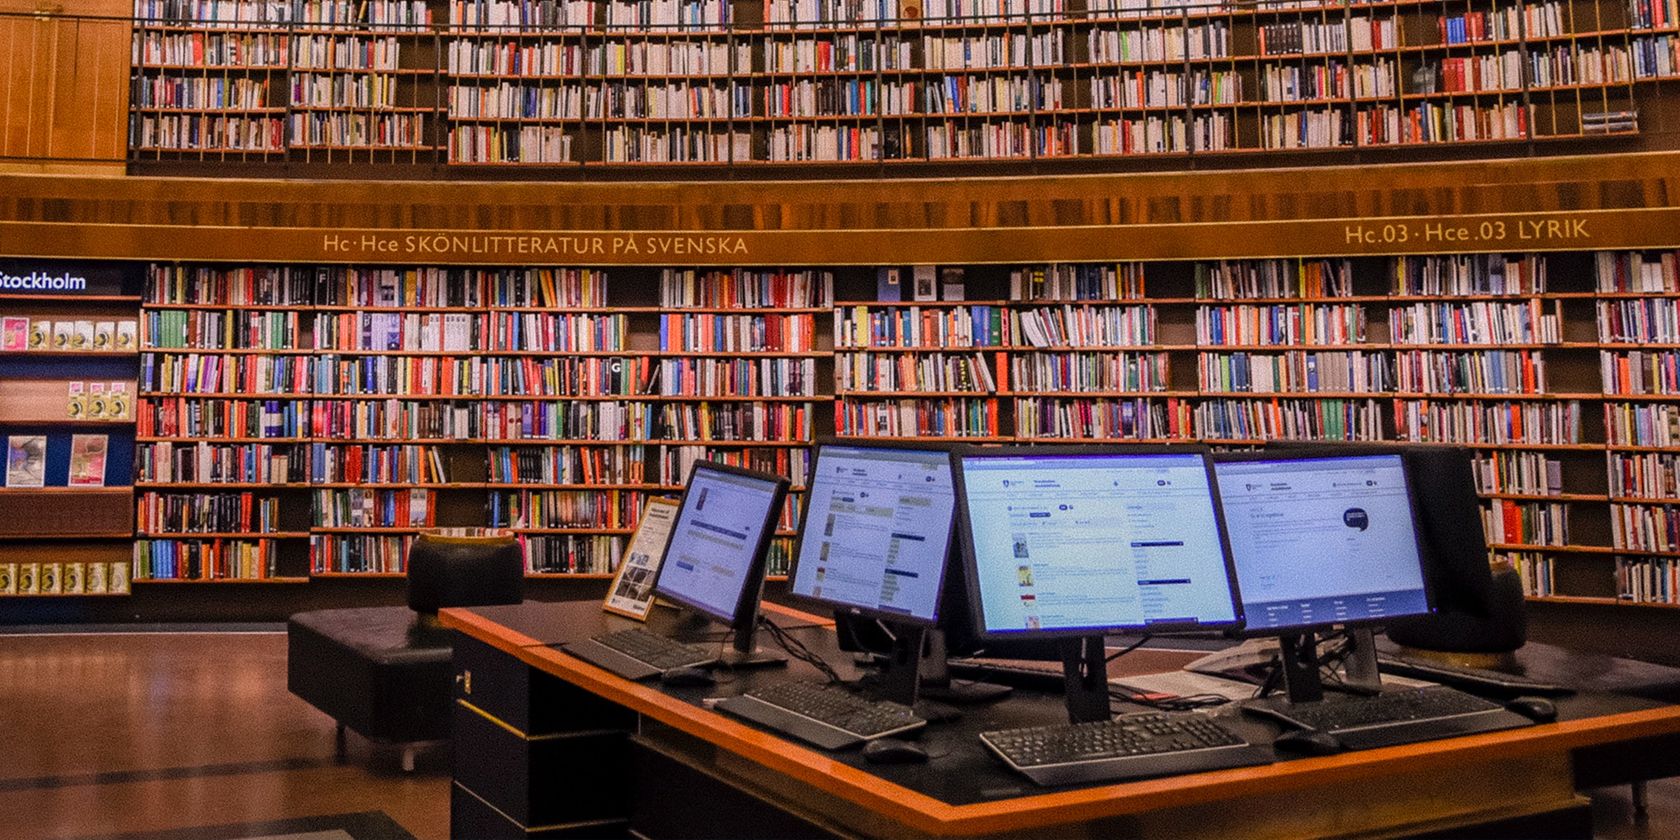 Don't use your private information on computers in a public library 